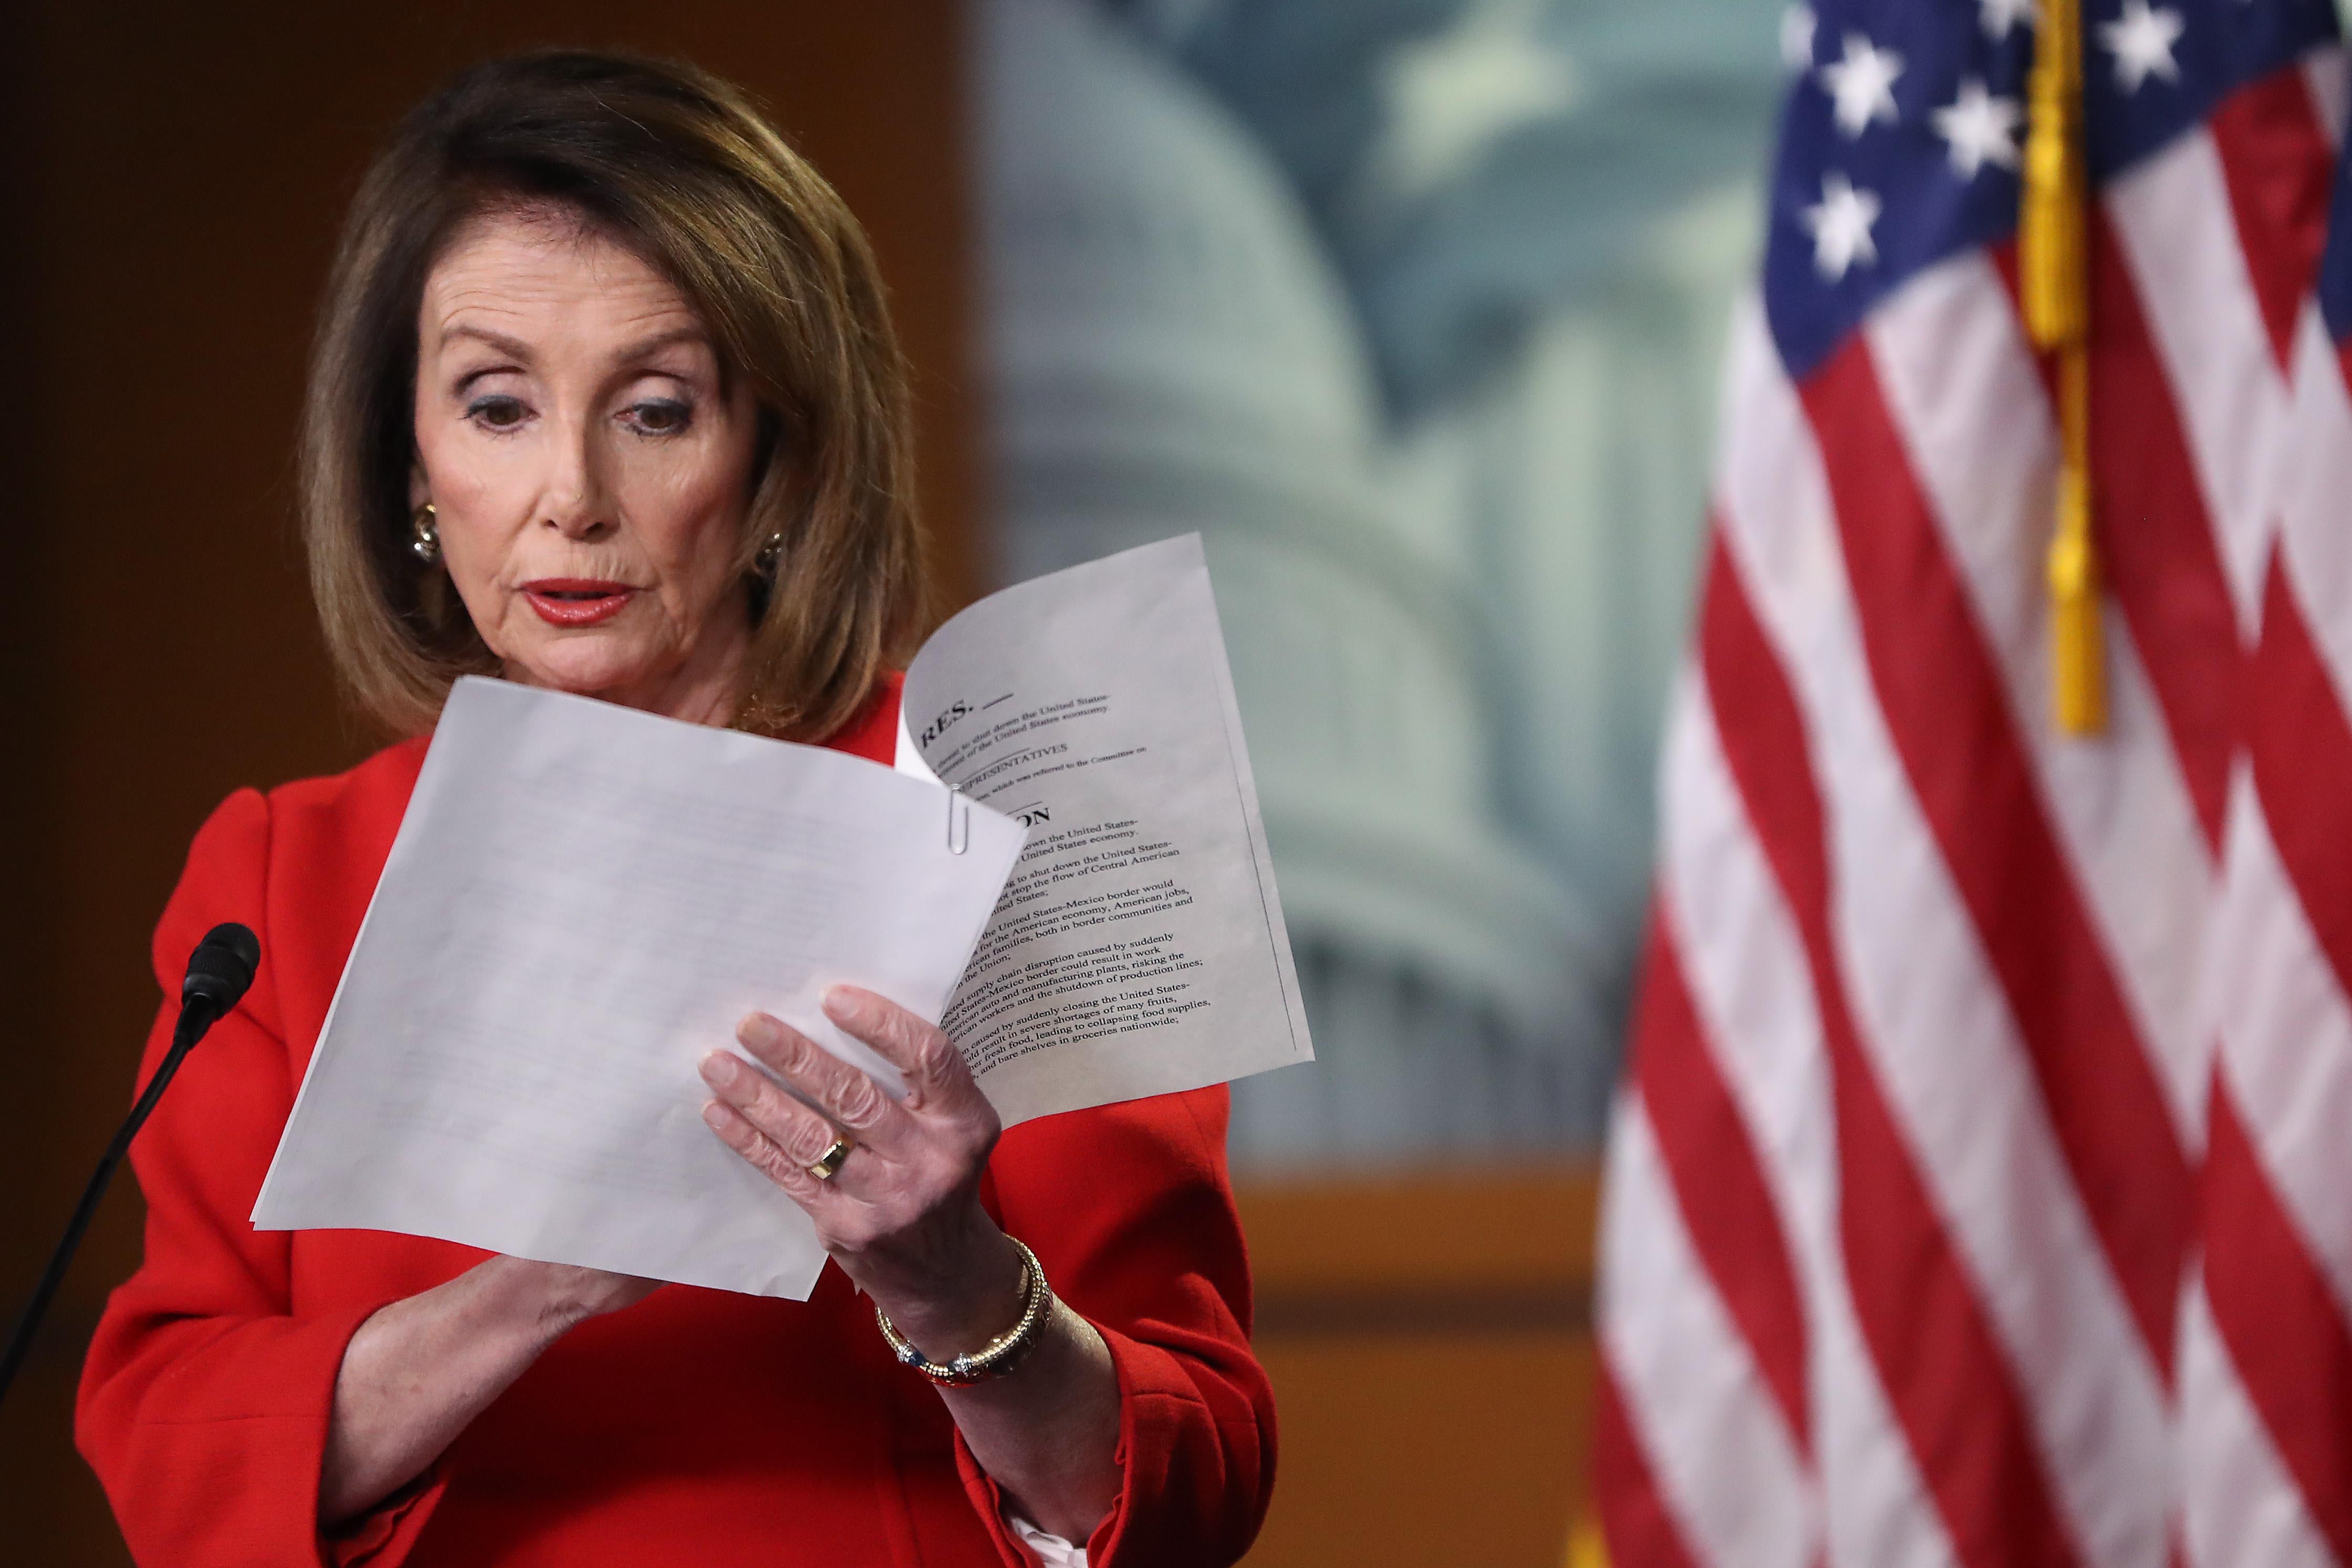 Speaker of the House Nancy Pelosi reads from a paper during her weekly news conference at the U.S. Capitol April 4, 2019 in Washington, DC.